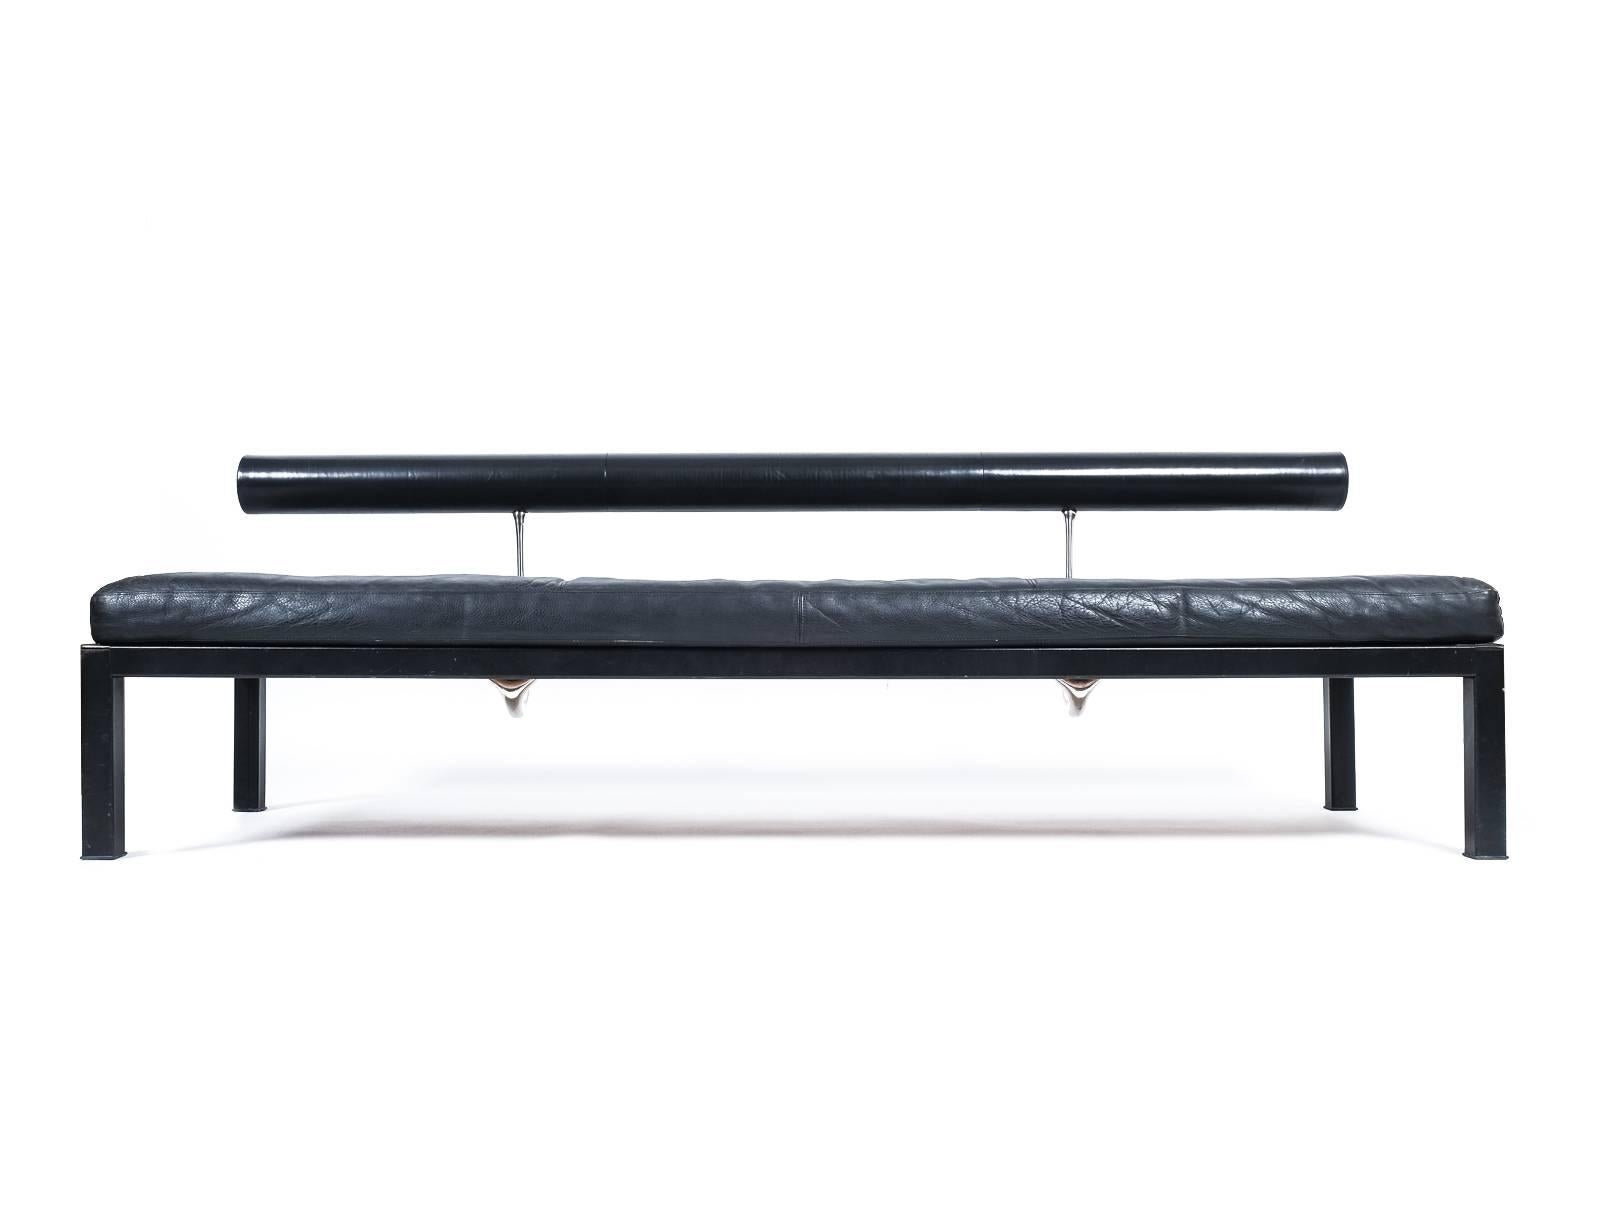 Very rare and minimalistic daybed or chaise longue designed by Antonio Citterio, 1986. The legs, frame and backrest are upholstered in black leather so is the original black leather cushion. Stunning polished aluminium details. It's in excellent